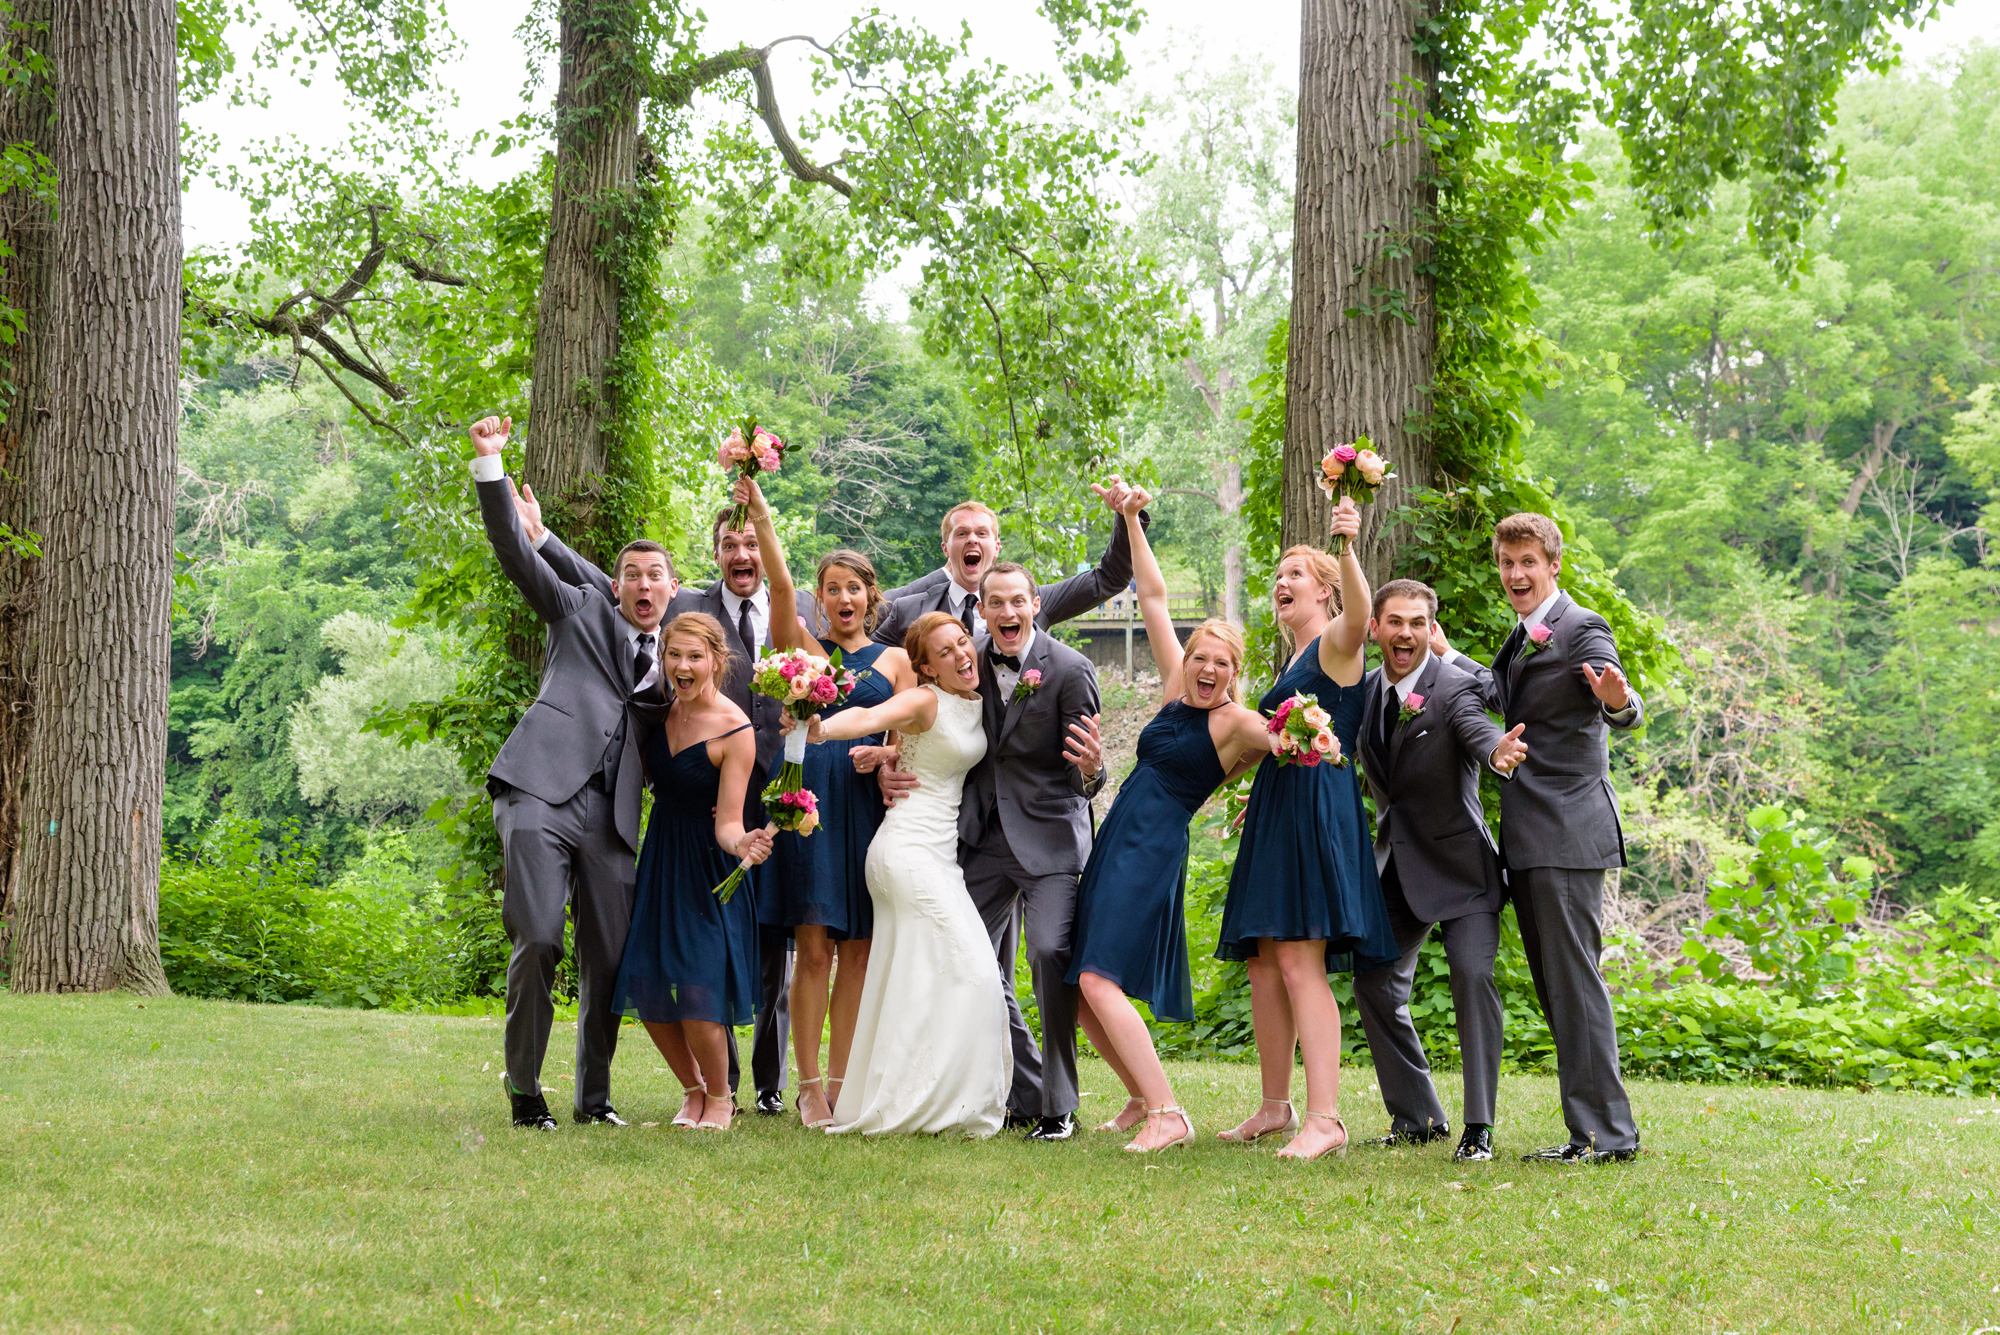 Bridal Party at Leeper Park after their wedding ceremony at the Basilica of the Sacred Heart on the campus of the University of Notre Dame